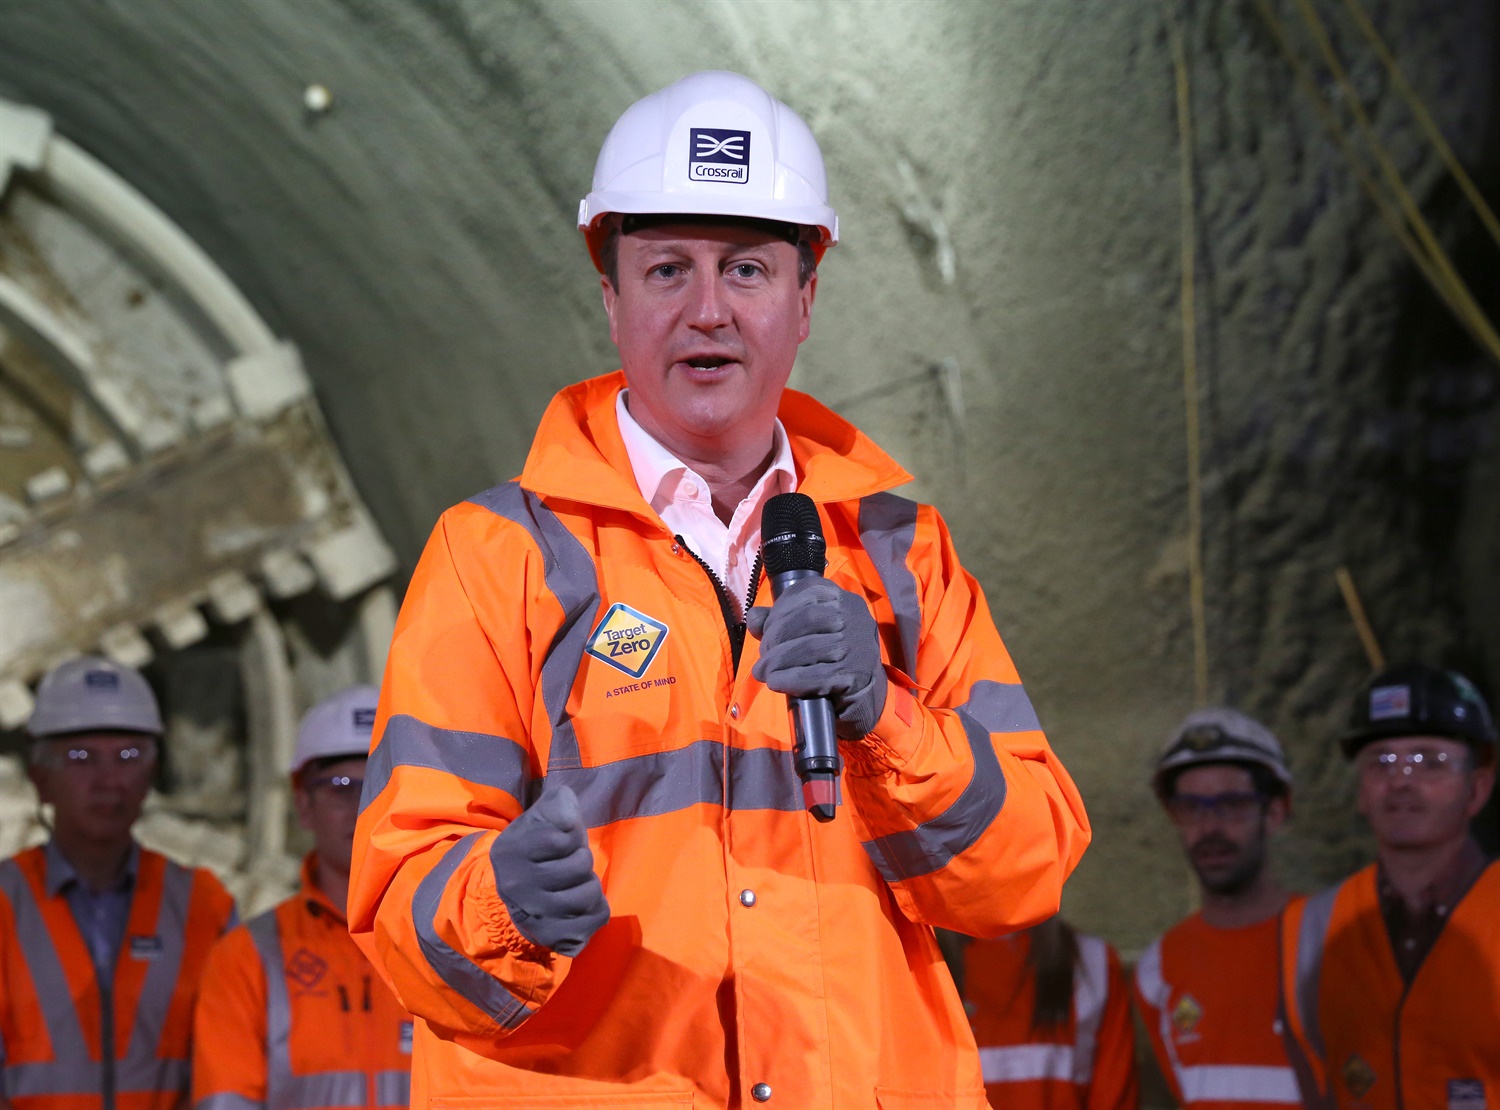 Prime Minister and Mayor of London celebrate completion of Crossrail s tunnelling marathon 200349